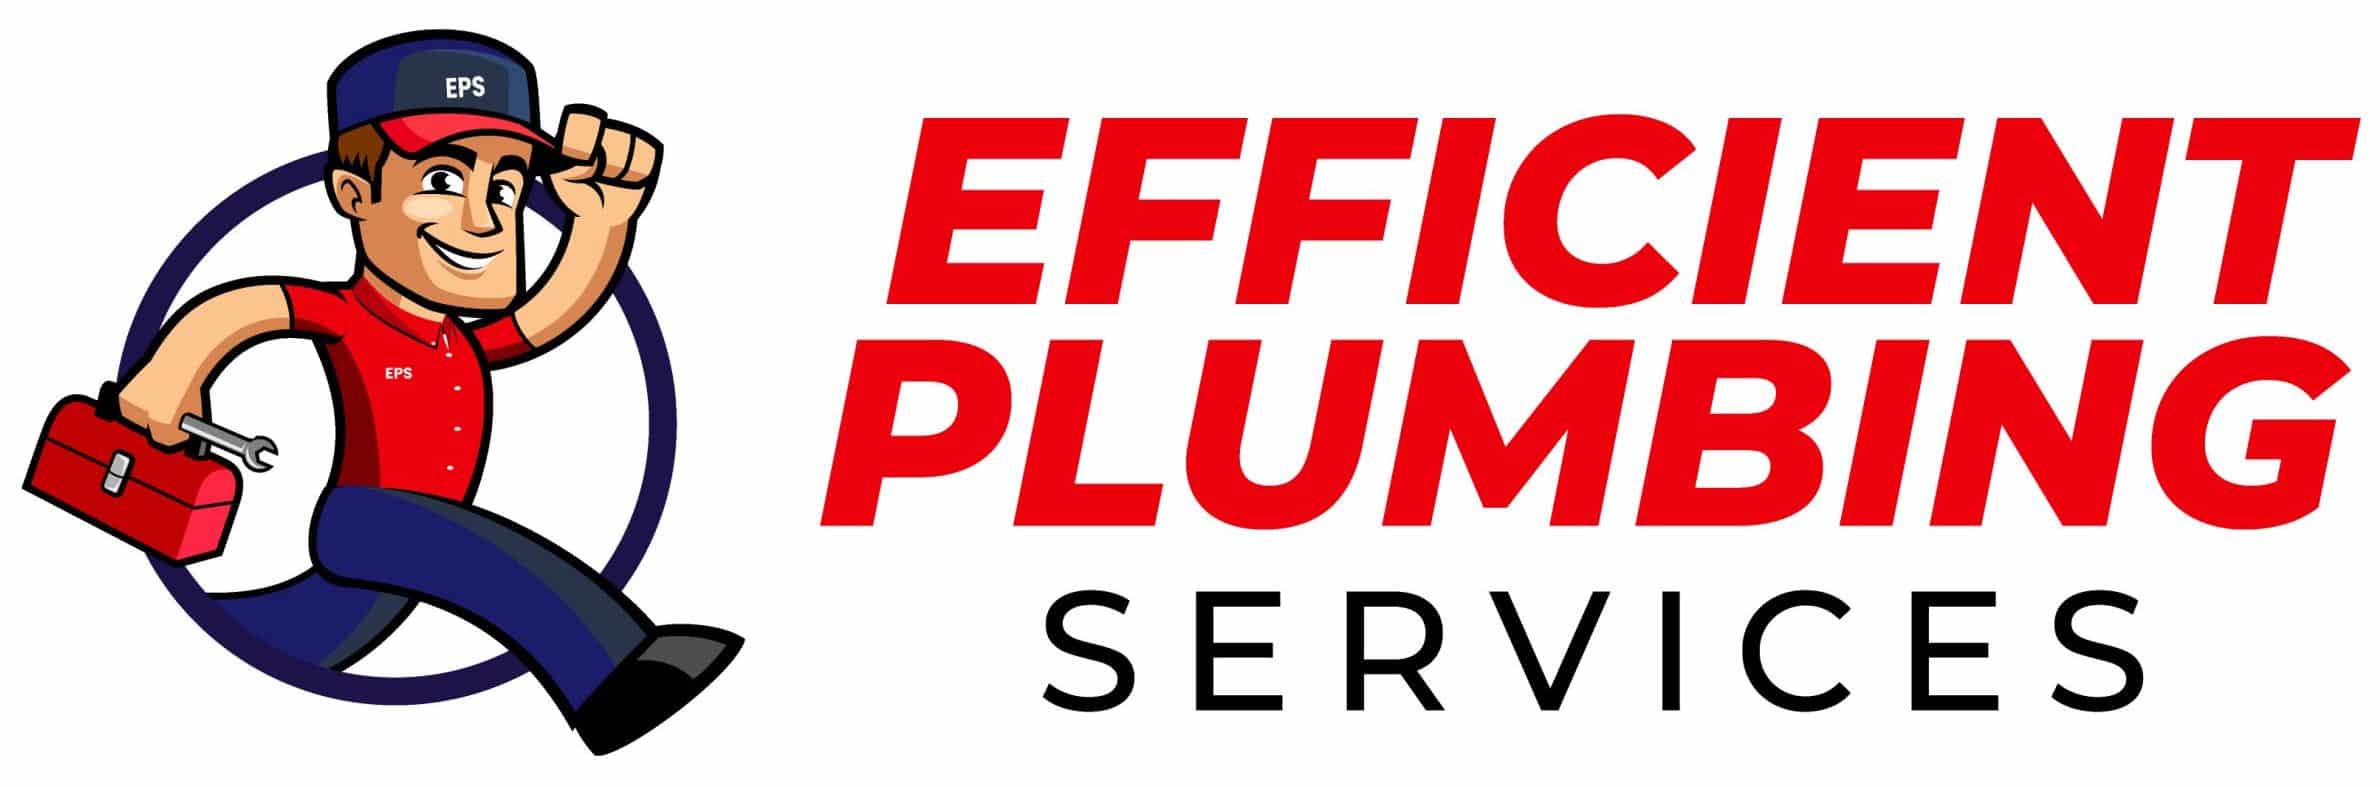 Efficient Plumbing Fixes for Quick and Lasting Solutions